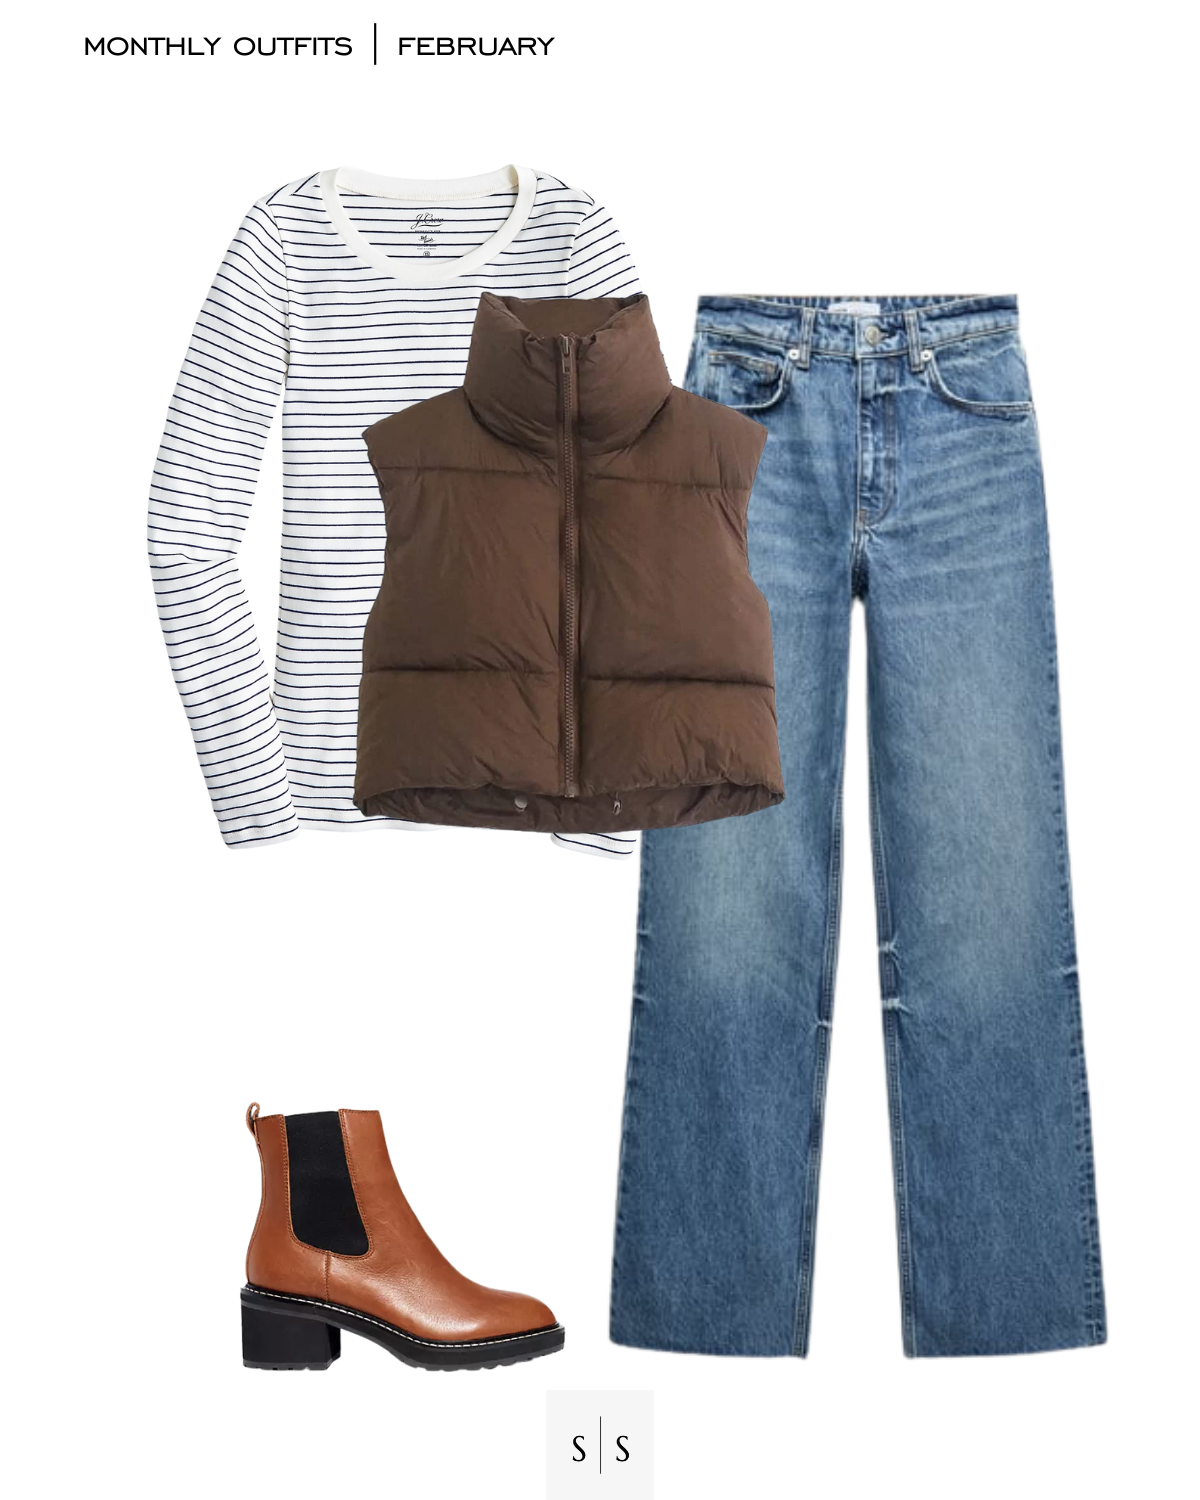 Puffer vest casual outfit idea